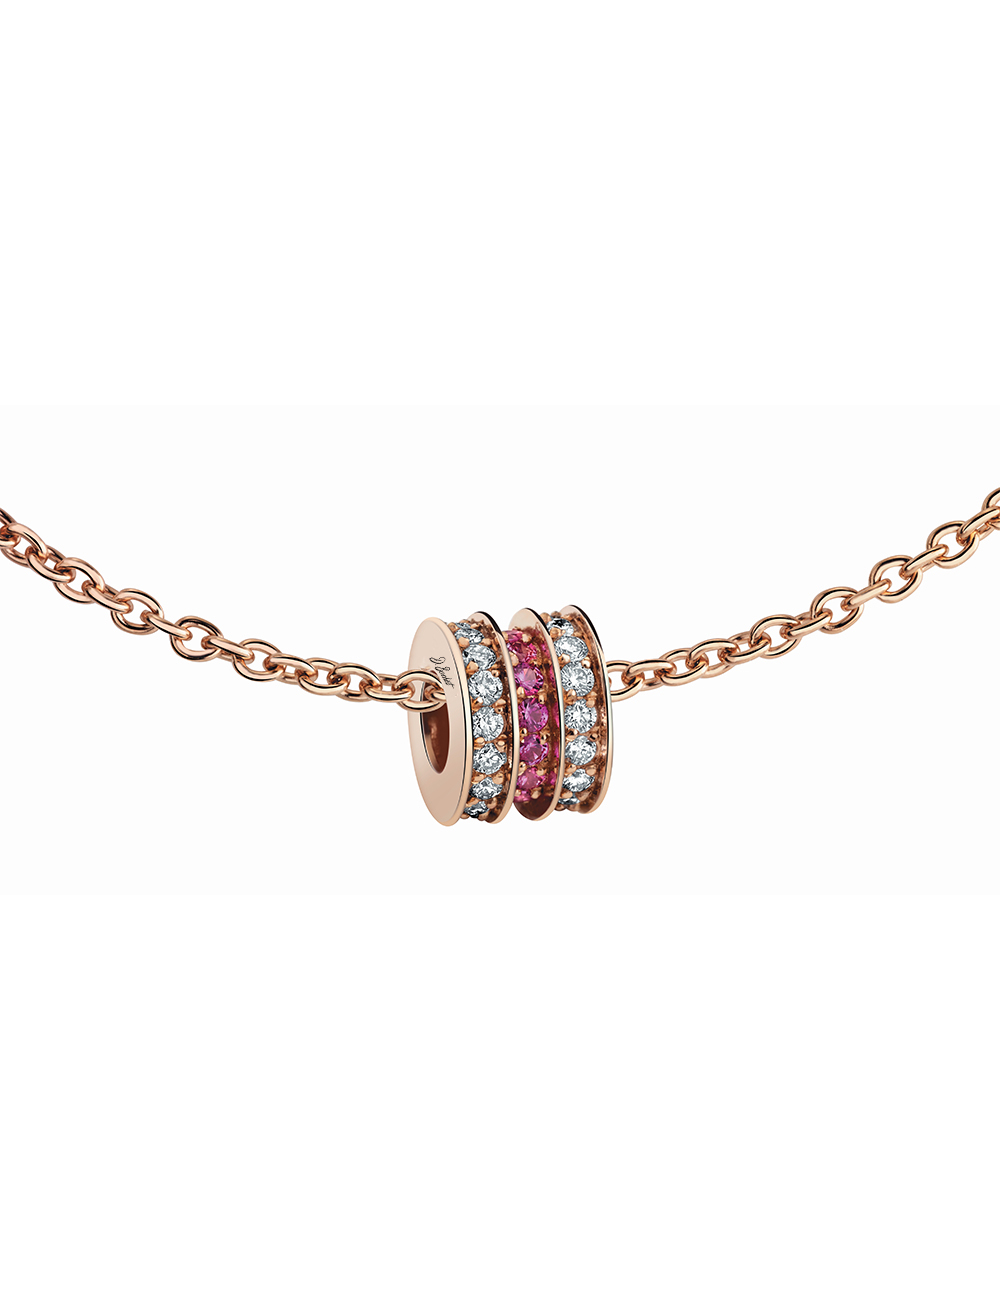 Rose gold 'Scroll In Love' pendant with pink sapphires and white diamonds, symbolizing luxury and elegance.